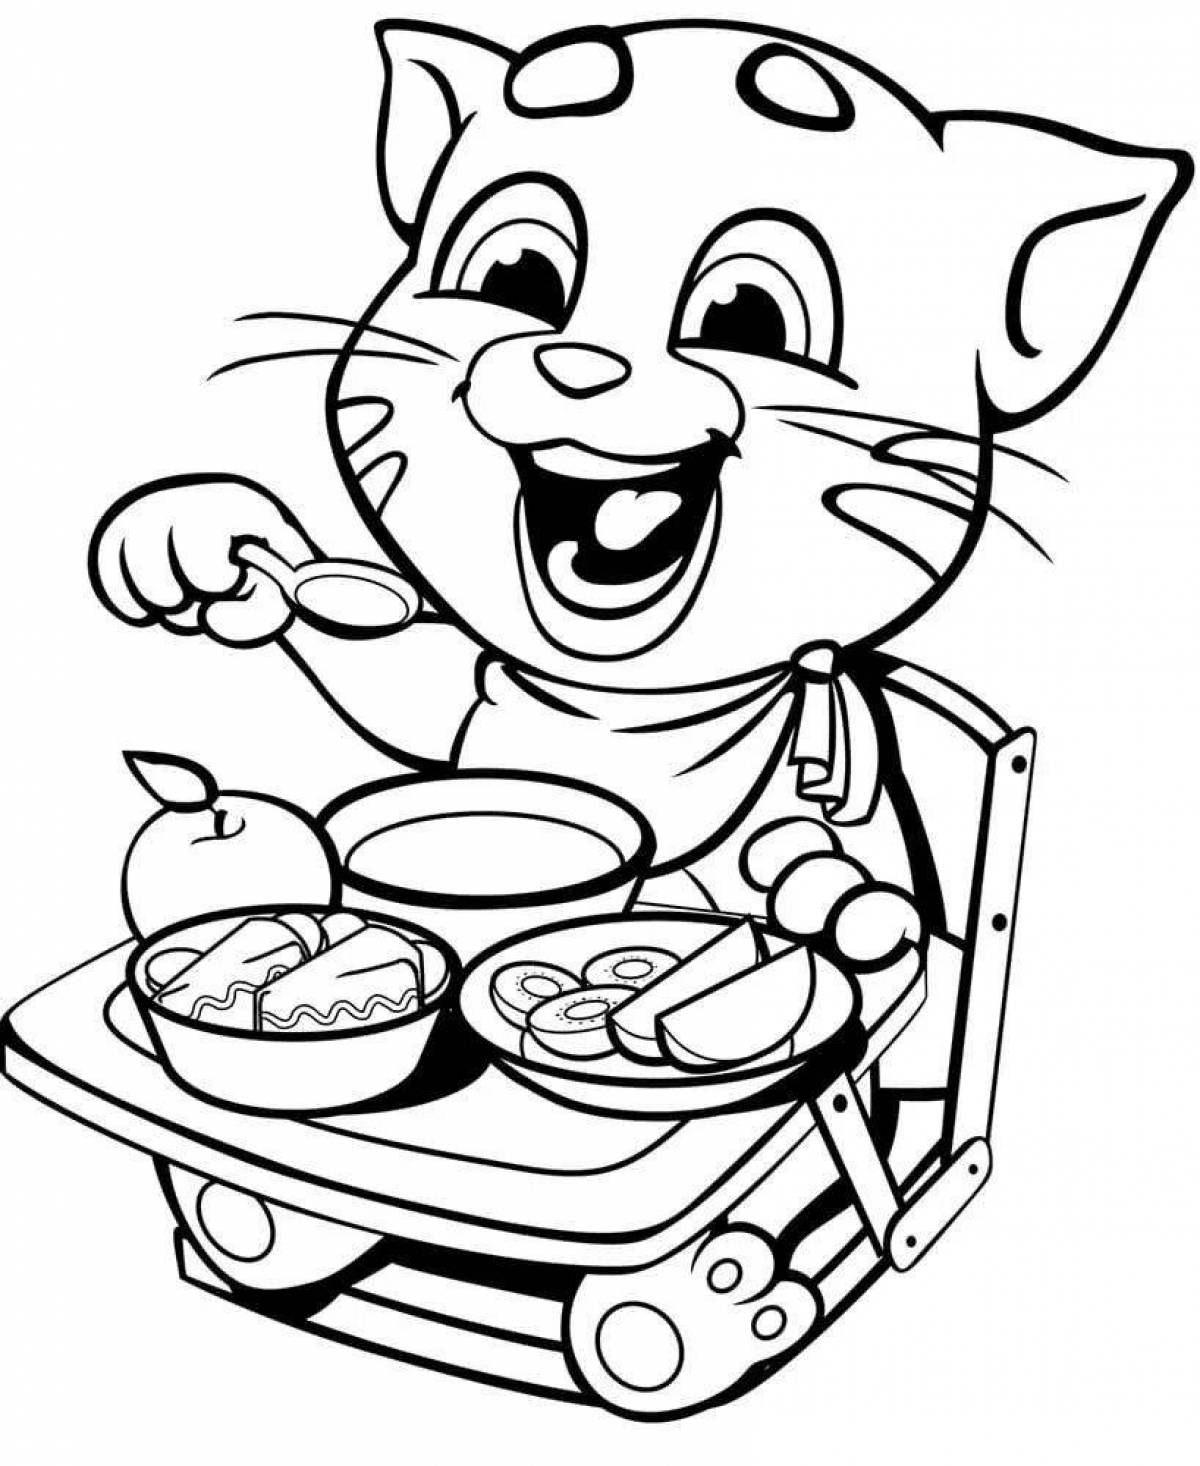 Awesome talking angela coloring book